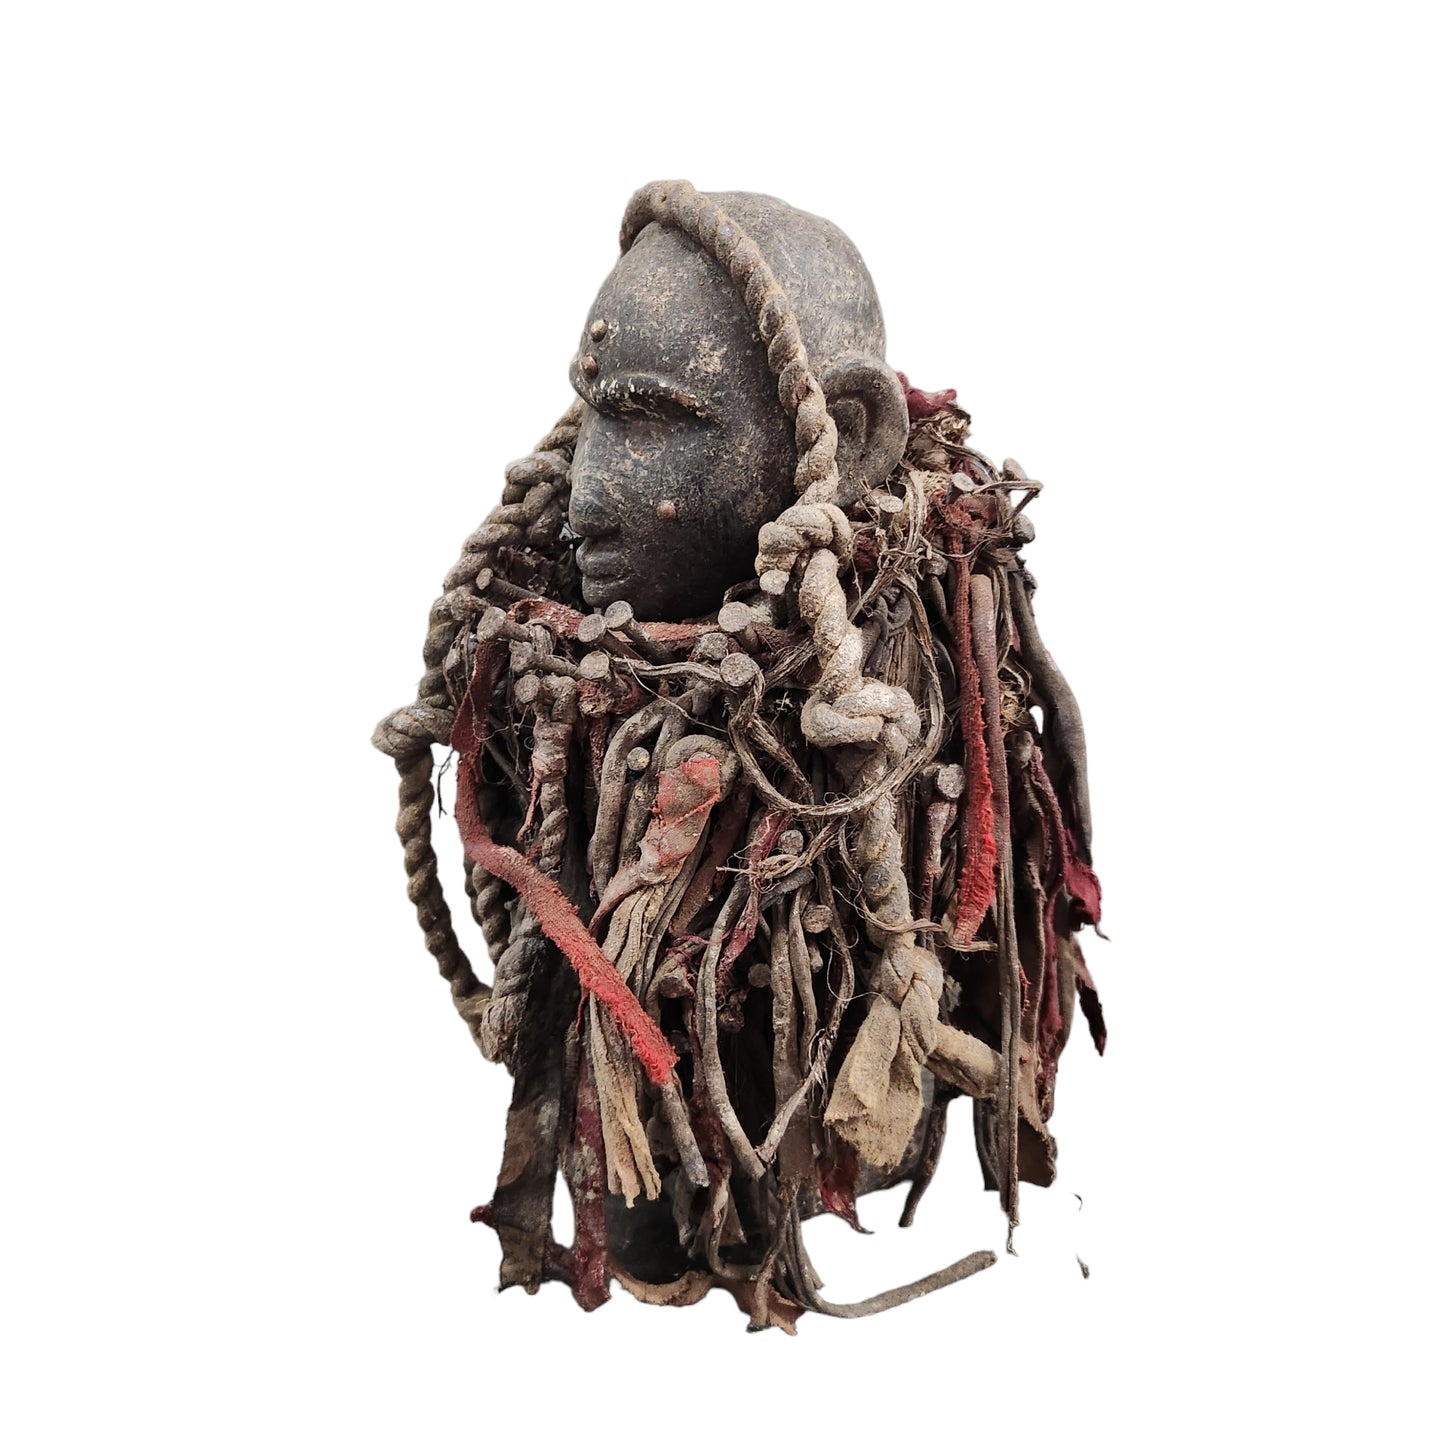 Bacongo Fetish from Congo (19th Century) - MD African Art